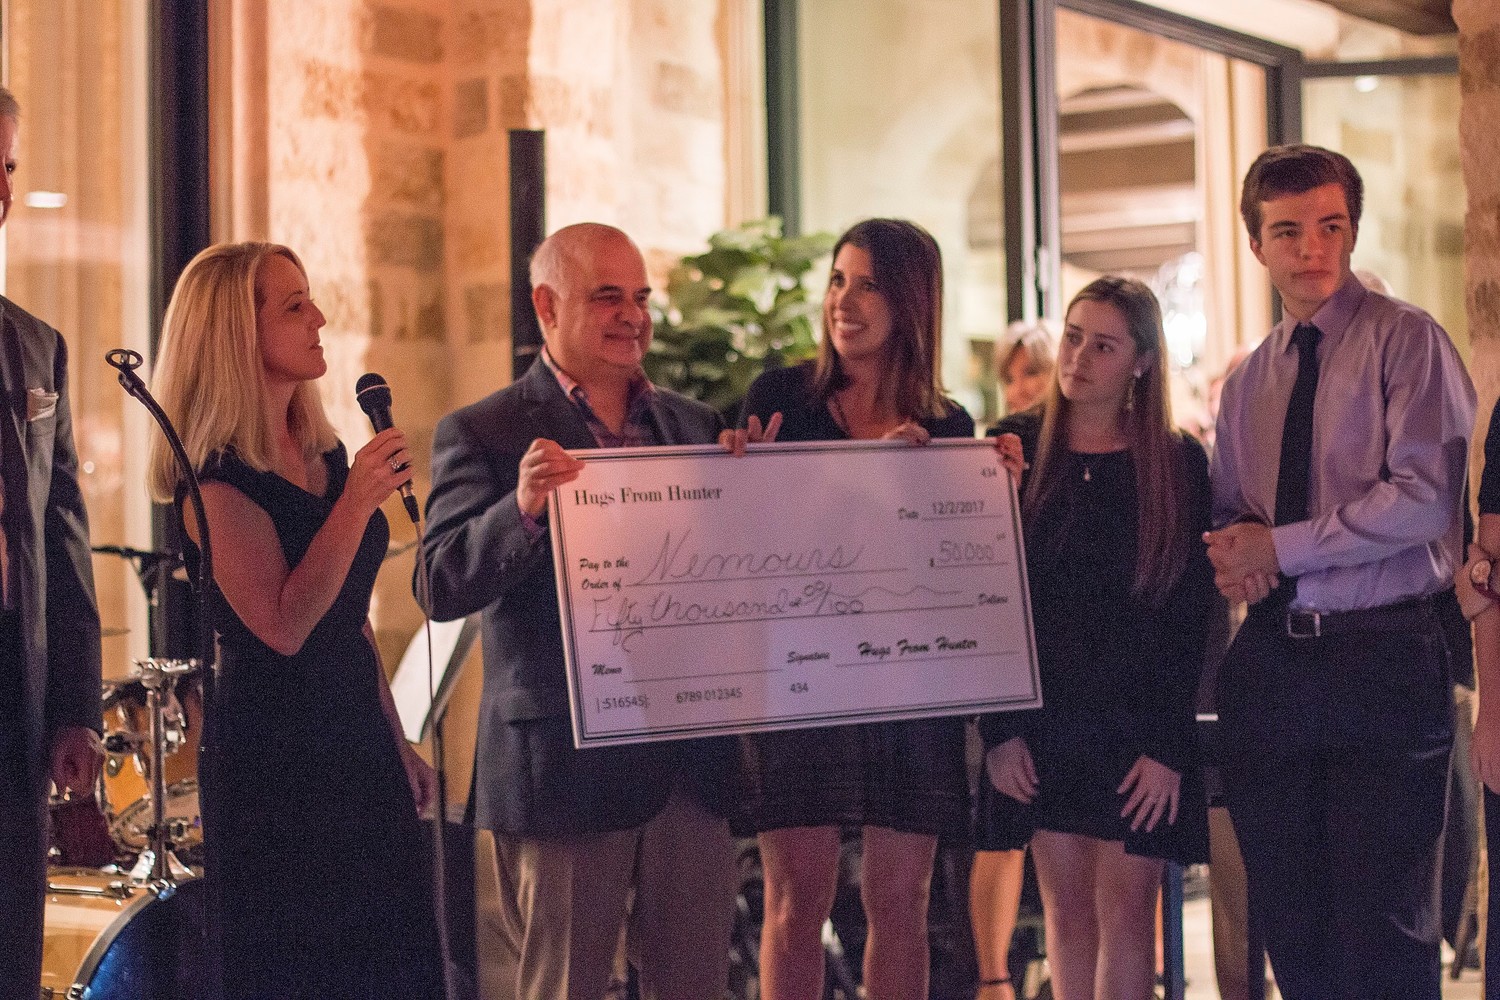 Event organizers participate in a $50,000 check presentation from the Hugs from Hunter Foundation to Nemours Children’s Specialty Care.